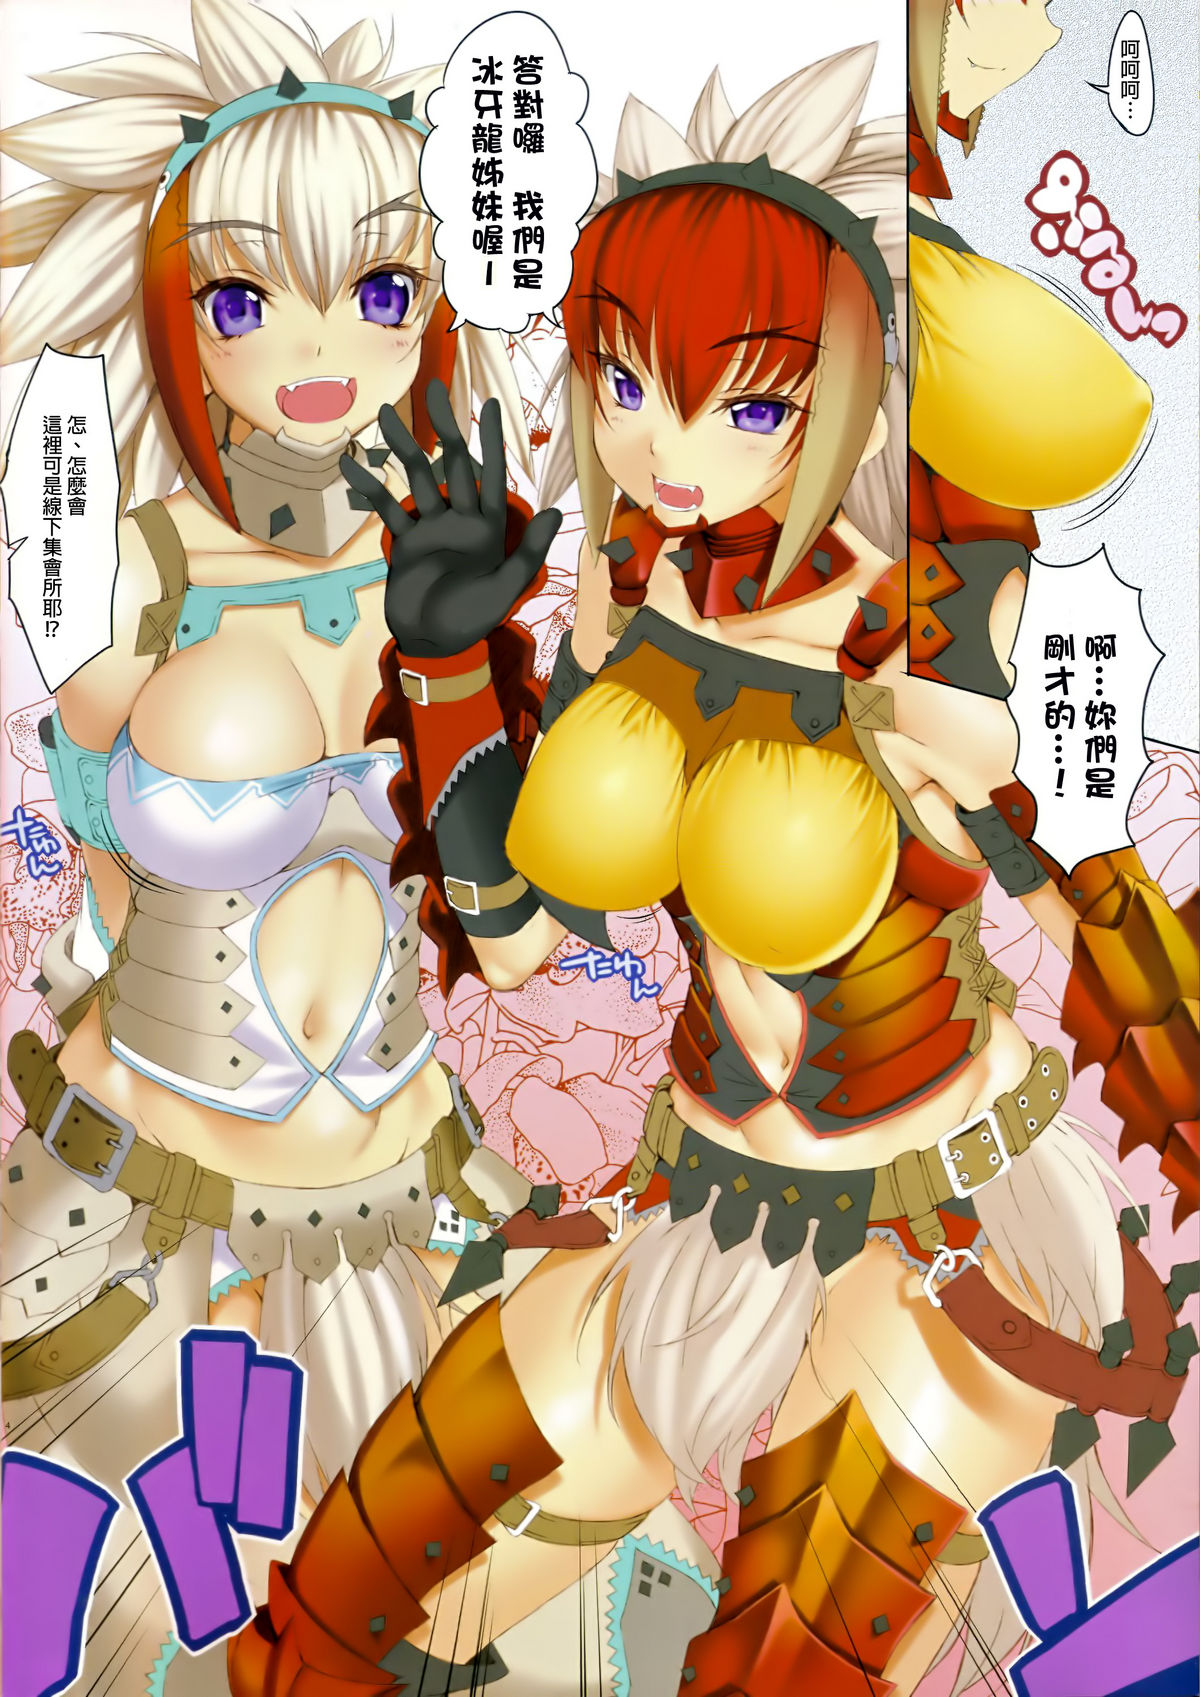 [Clesta (Kure Masahiro)] CL-orz 15 (Monster Hunter)[Chinese][final個人漢化][Decensored] (同人誌) [クレスタ (呉マサヒロ)] CL-orz 15 (モンスターハンター)[final個人漢化][無修正by zoidsking]